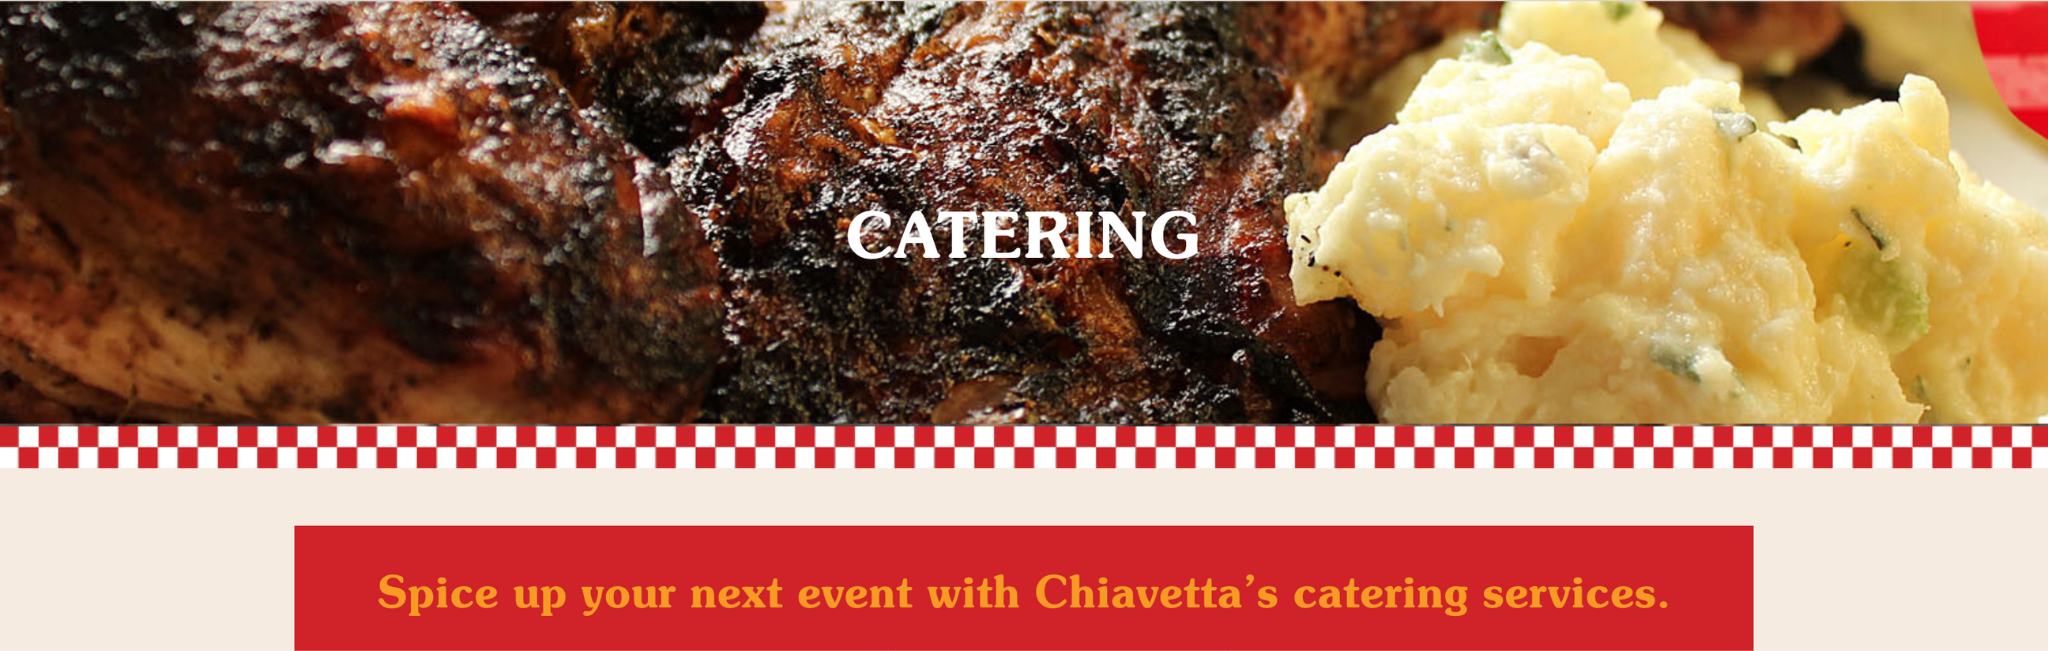 Chiavetta's Catering: A background image of grilled chicken and mashed potatoes with a red-and-white checkered banner below it. "CATERING" appears in bold white text. Below that, in orange text on top of a red banner: "Spice up your next event with Chiavetta’s catering services."